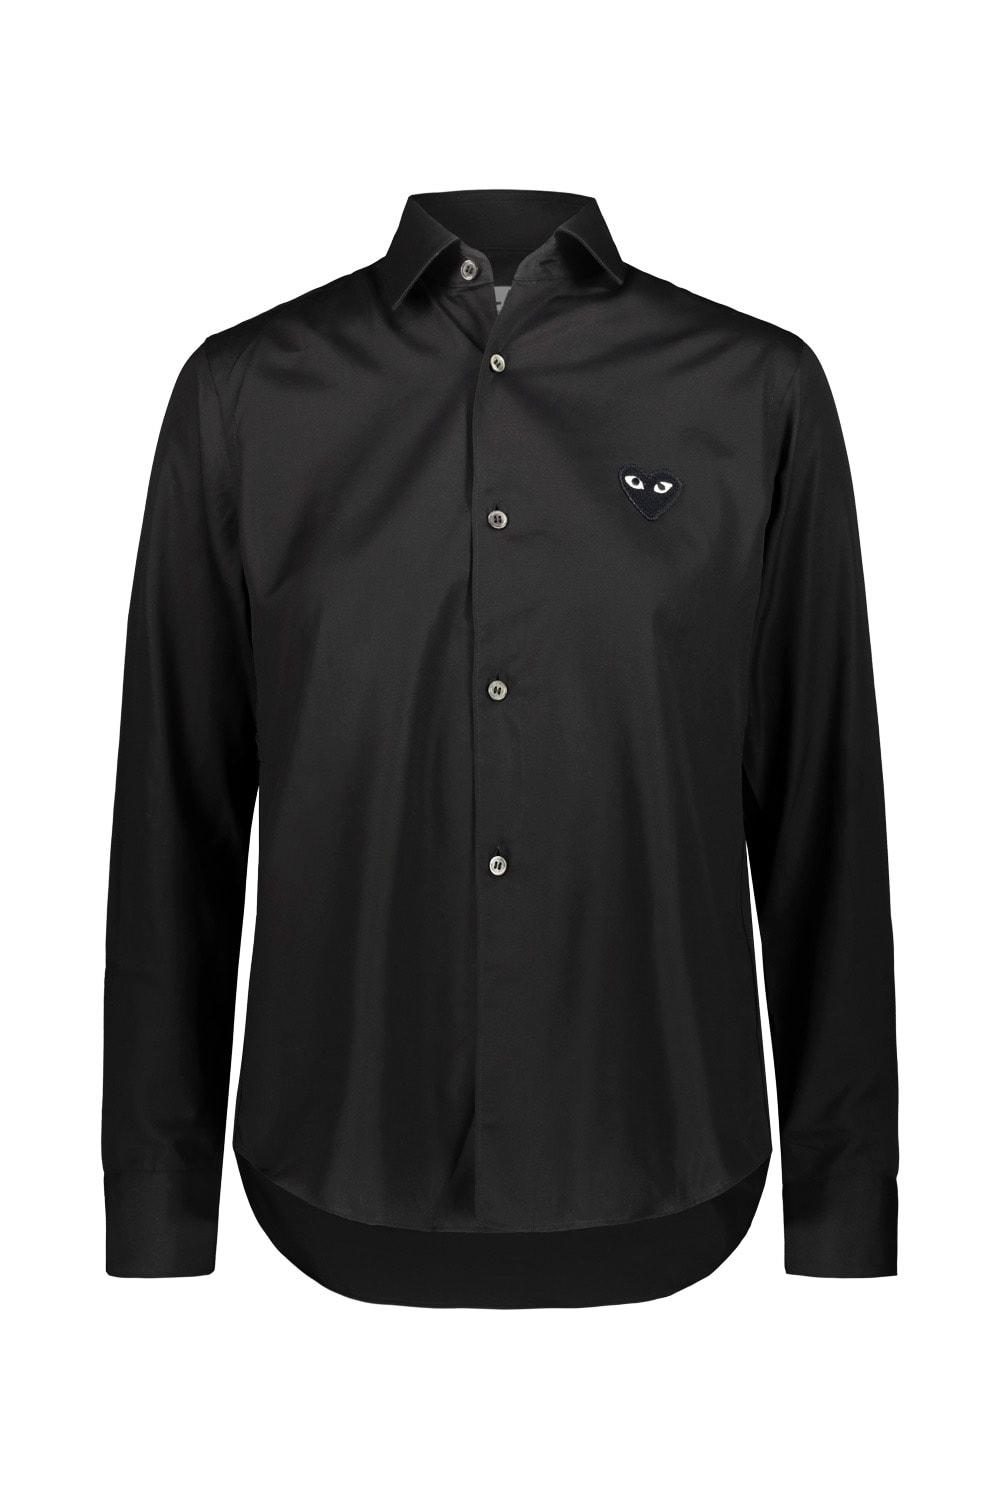 COMME DES GARÇONS PLAY Play Des Shirt In Cotton Poplin With Black Embroidered Heart | Lyst